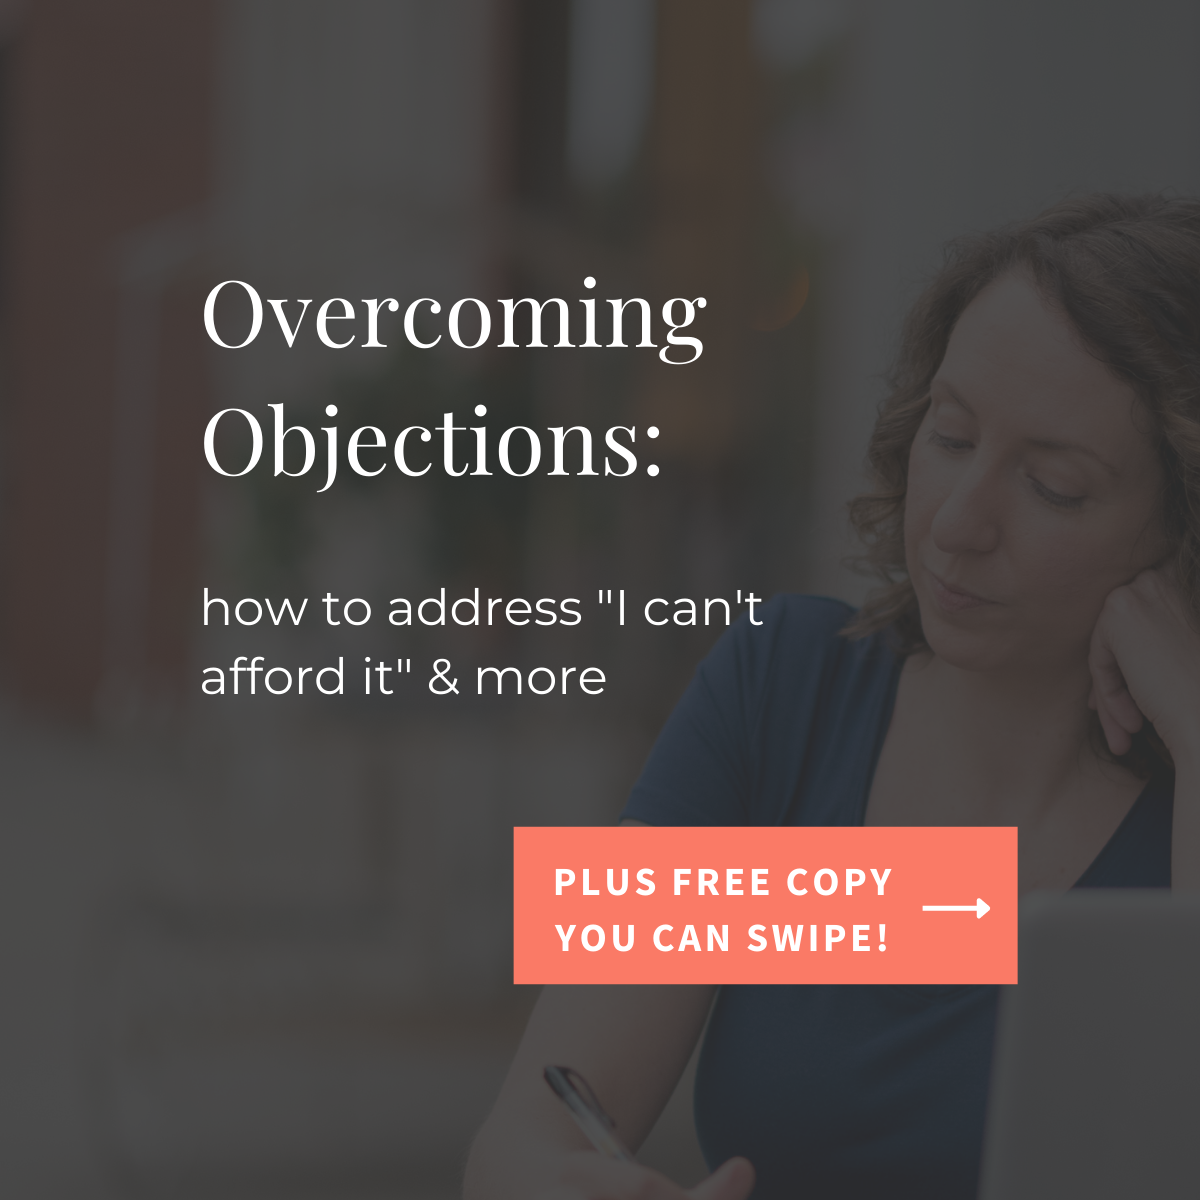 Overcoming Objections & “I can’t afford it”